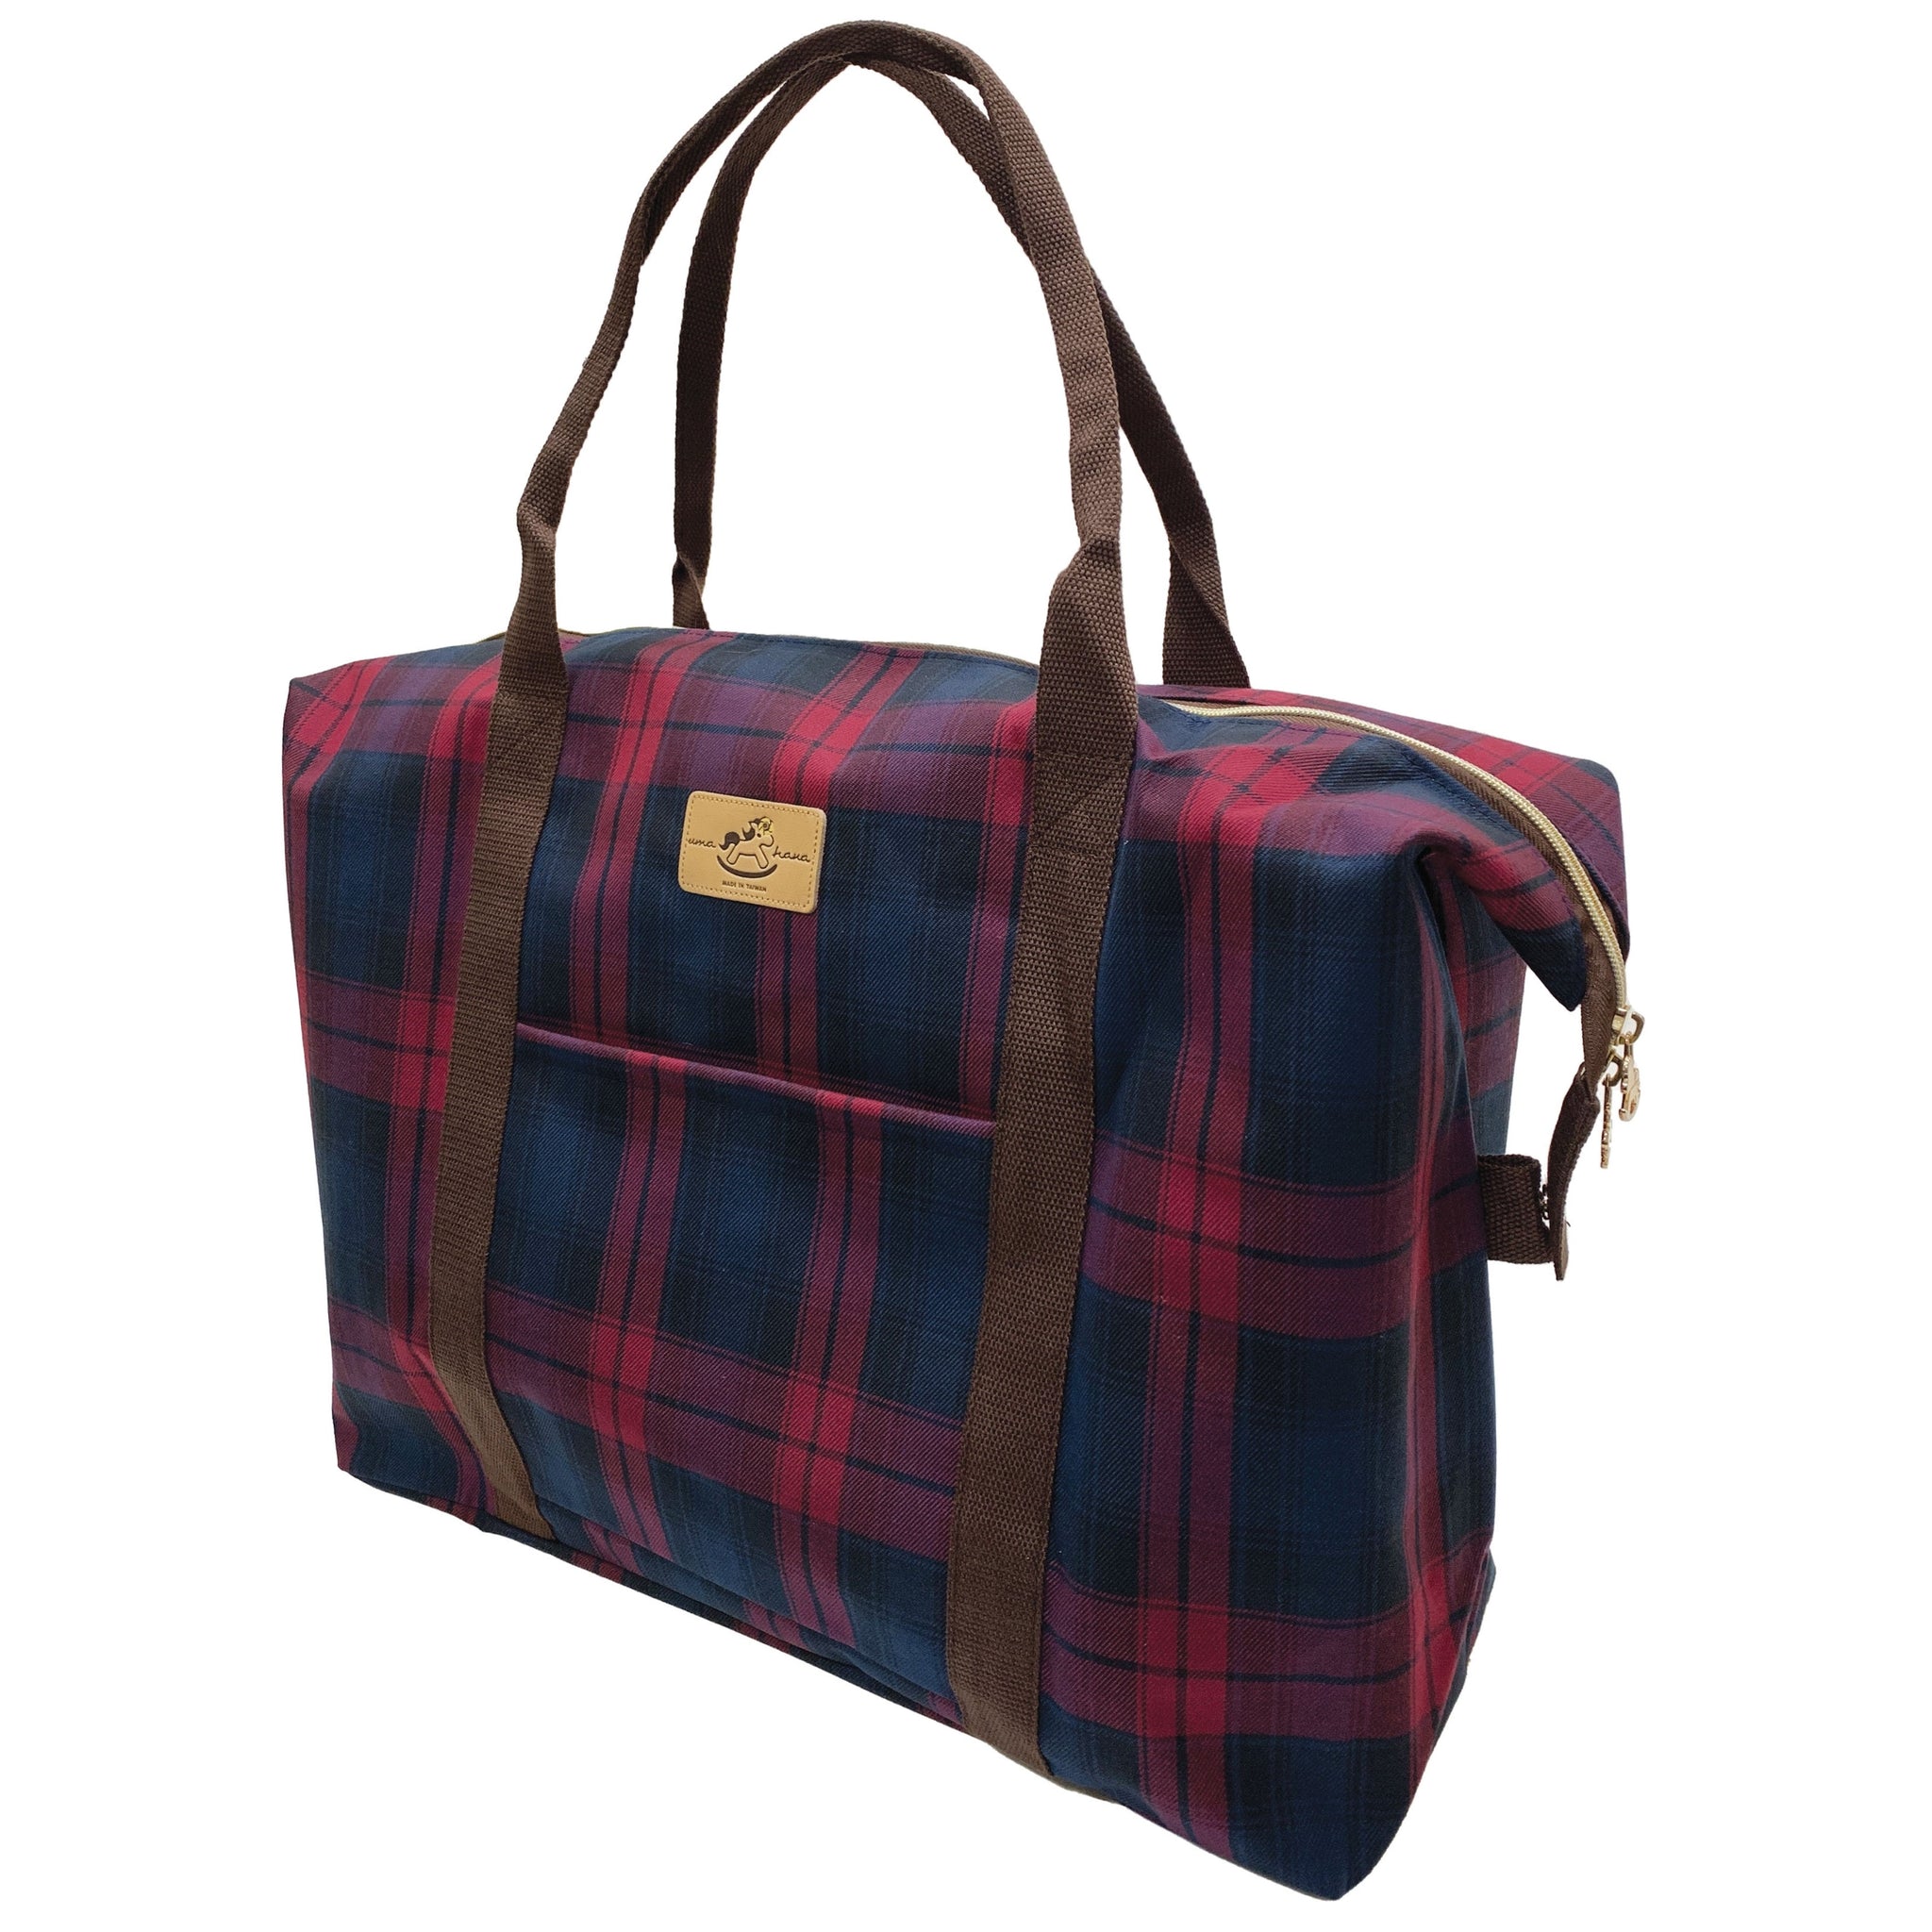 Red & Blue Tartan Plaid Extra Large Travel Tote